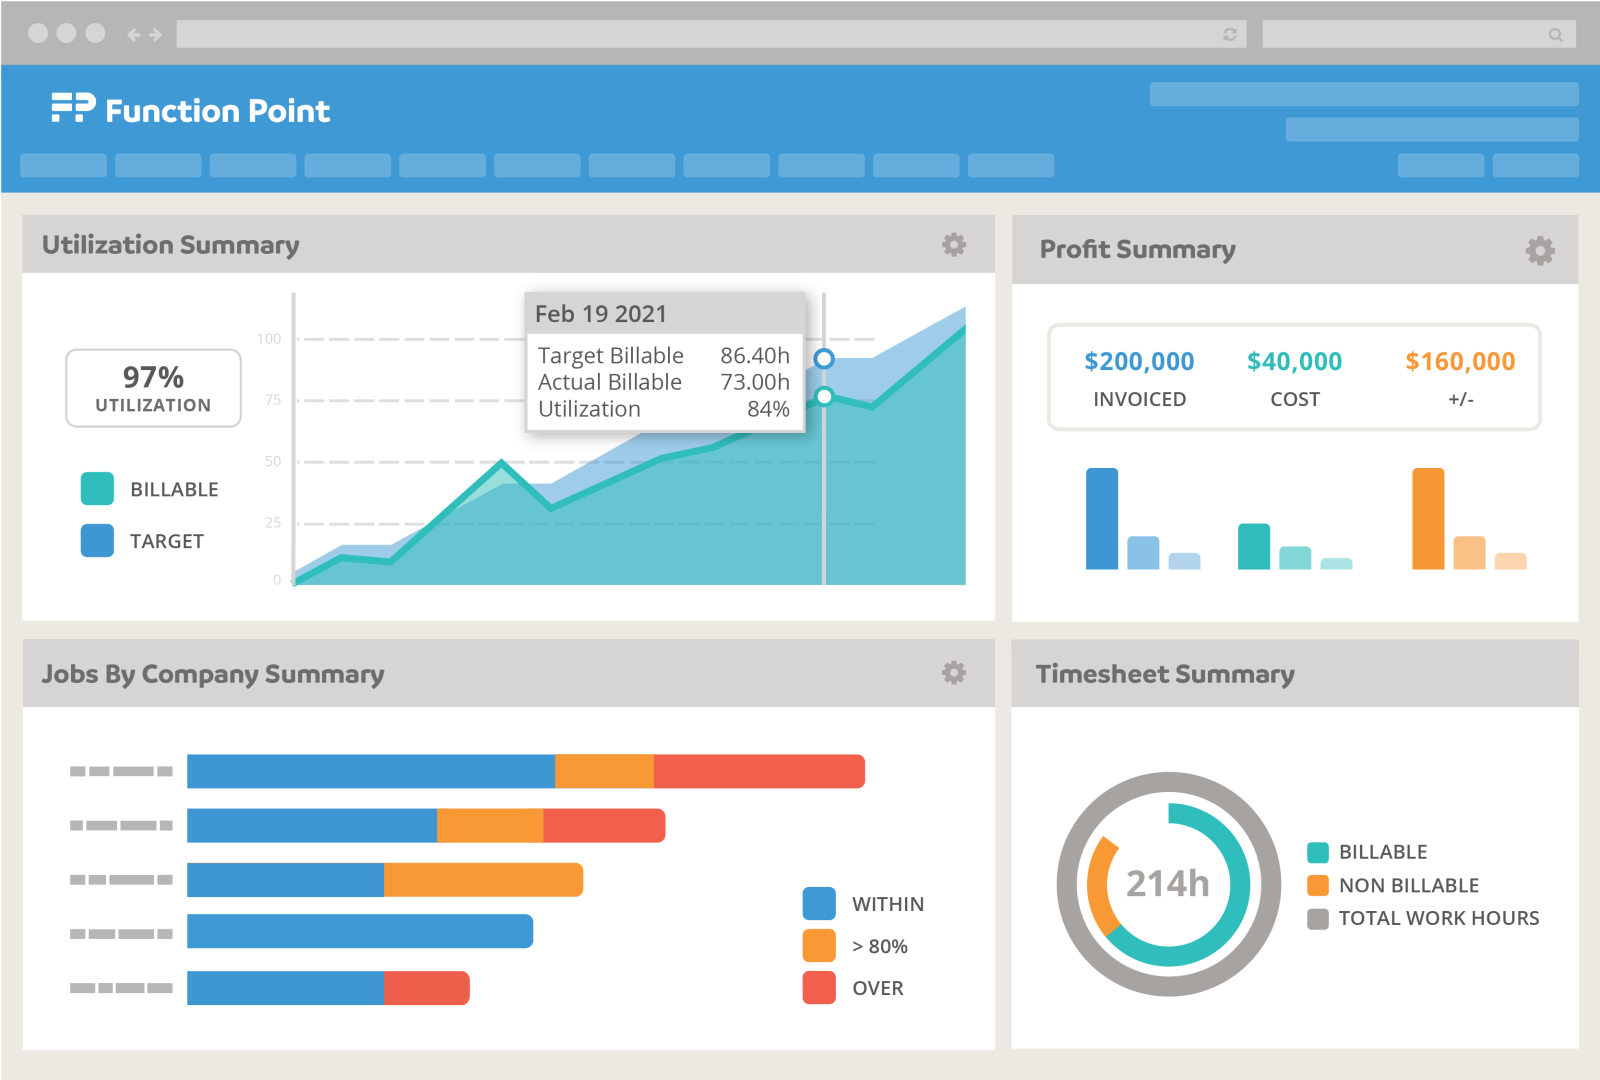 Function Point's dashboard